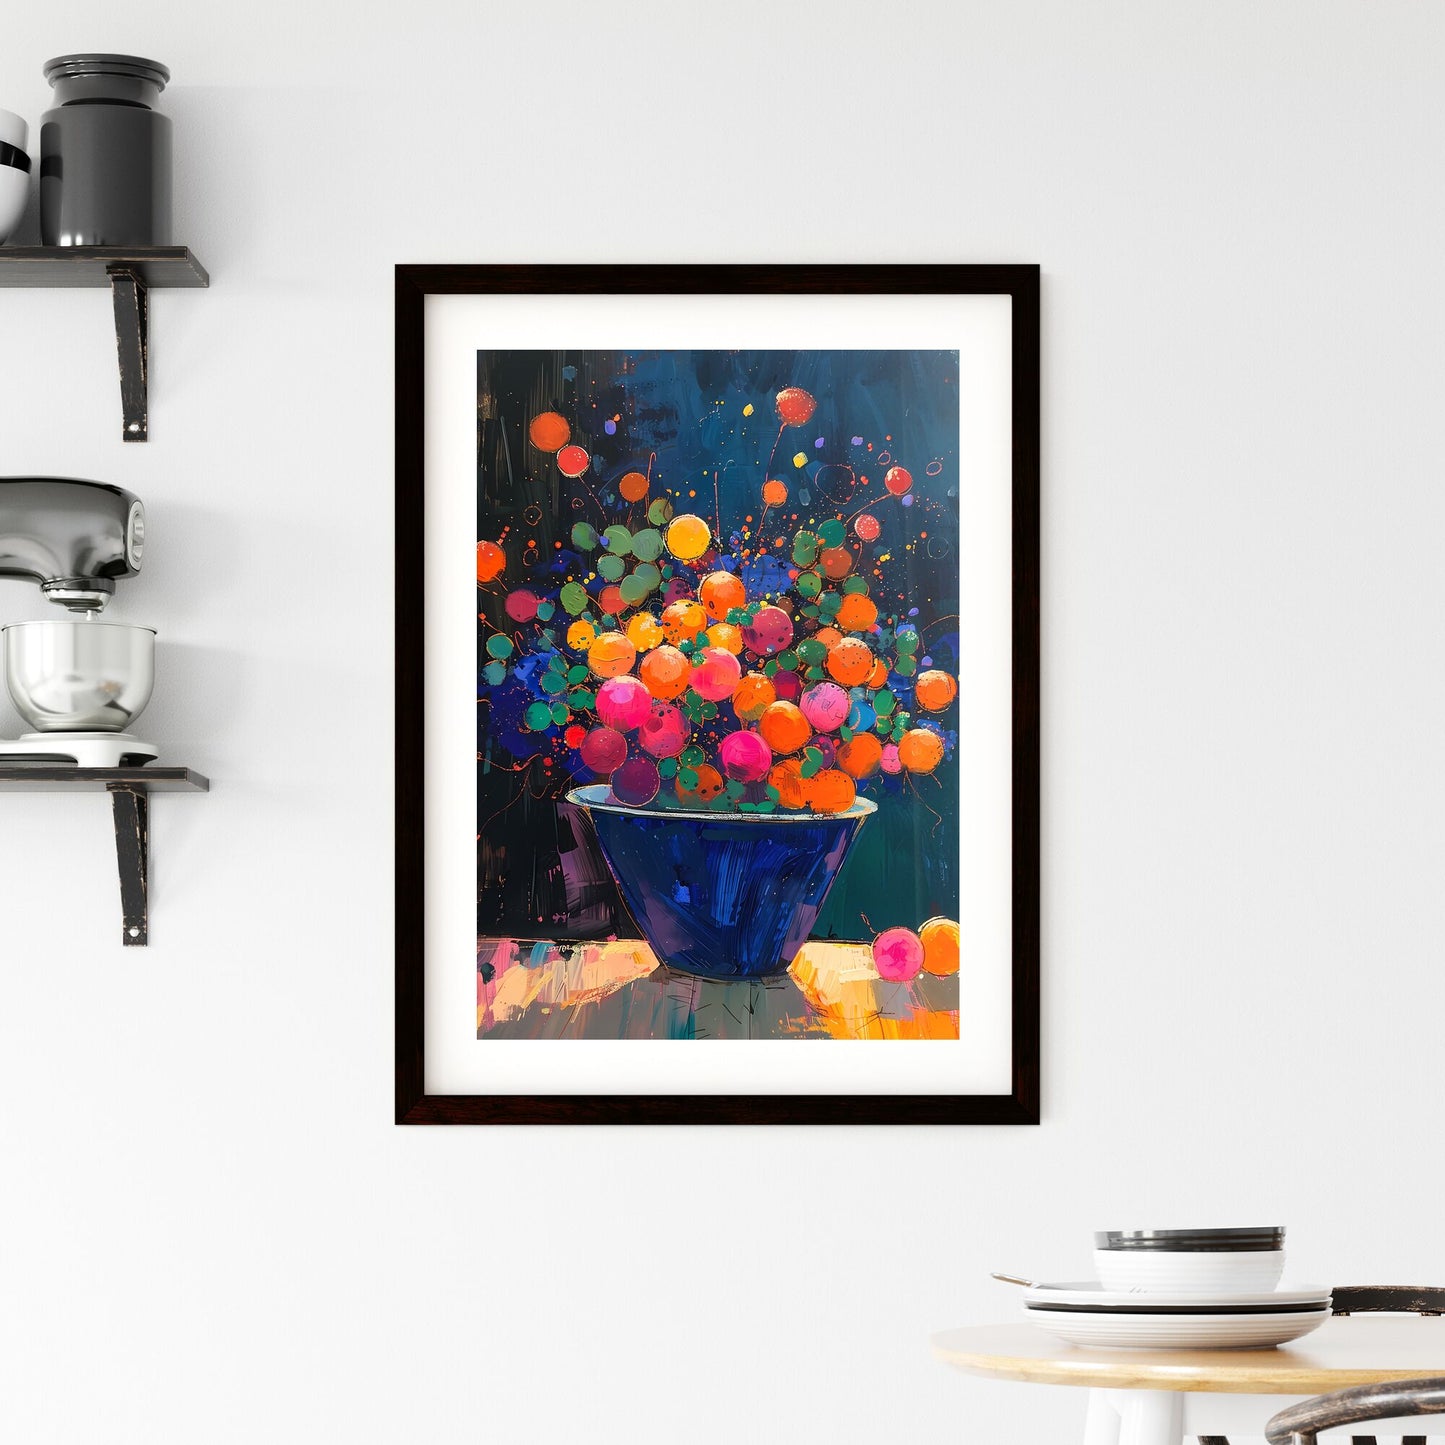 Abstract Fruit Bowl: Whimsical Multimedia Painting with Vibrant Colors and Kid-Like Elements Inspired by Zaire School of Popular Painting Default Title